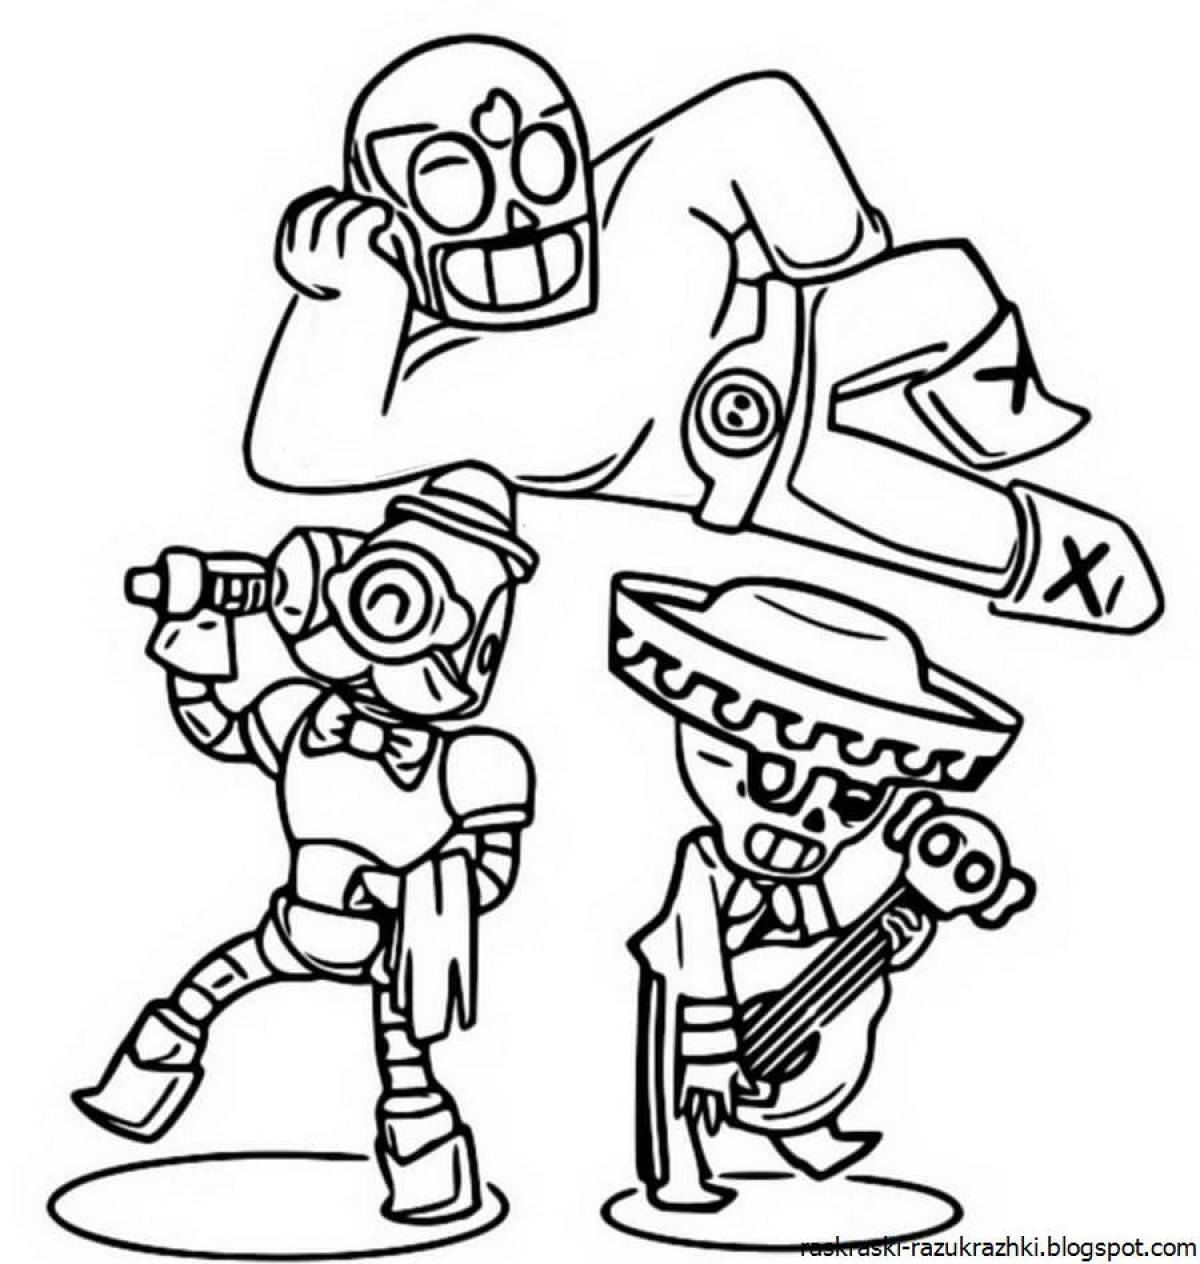 Coloring page energetic bravo